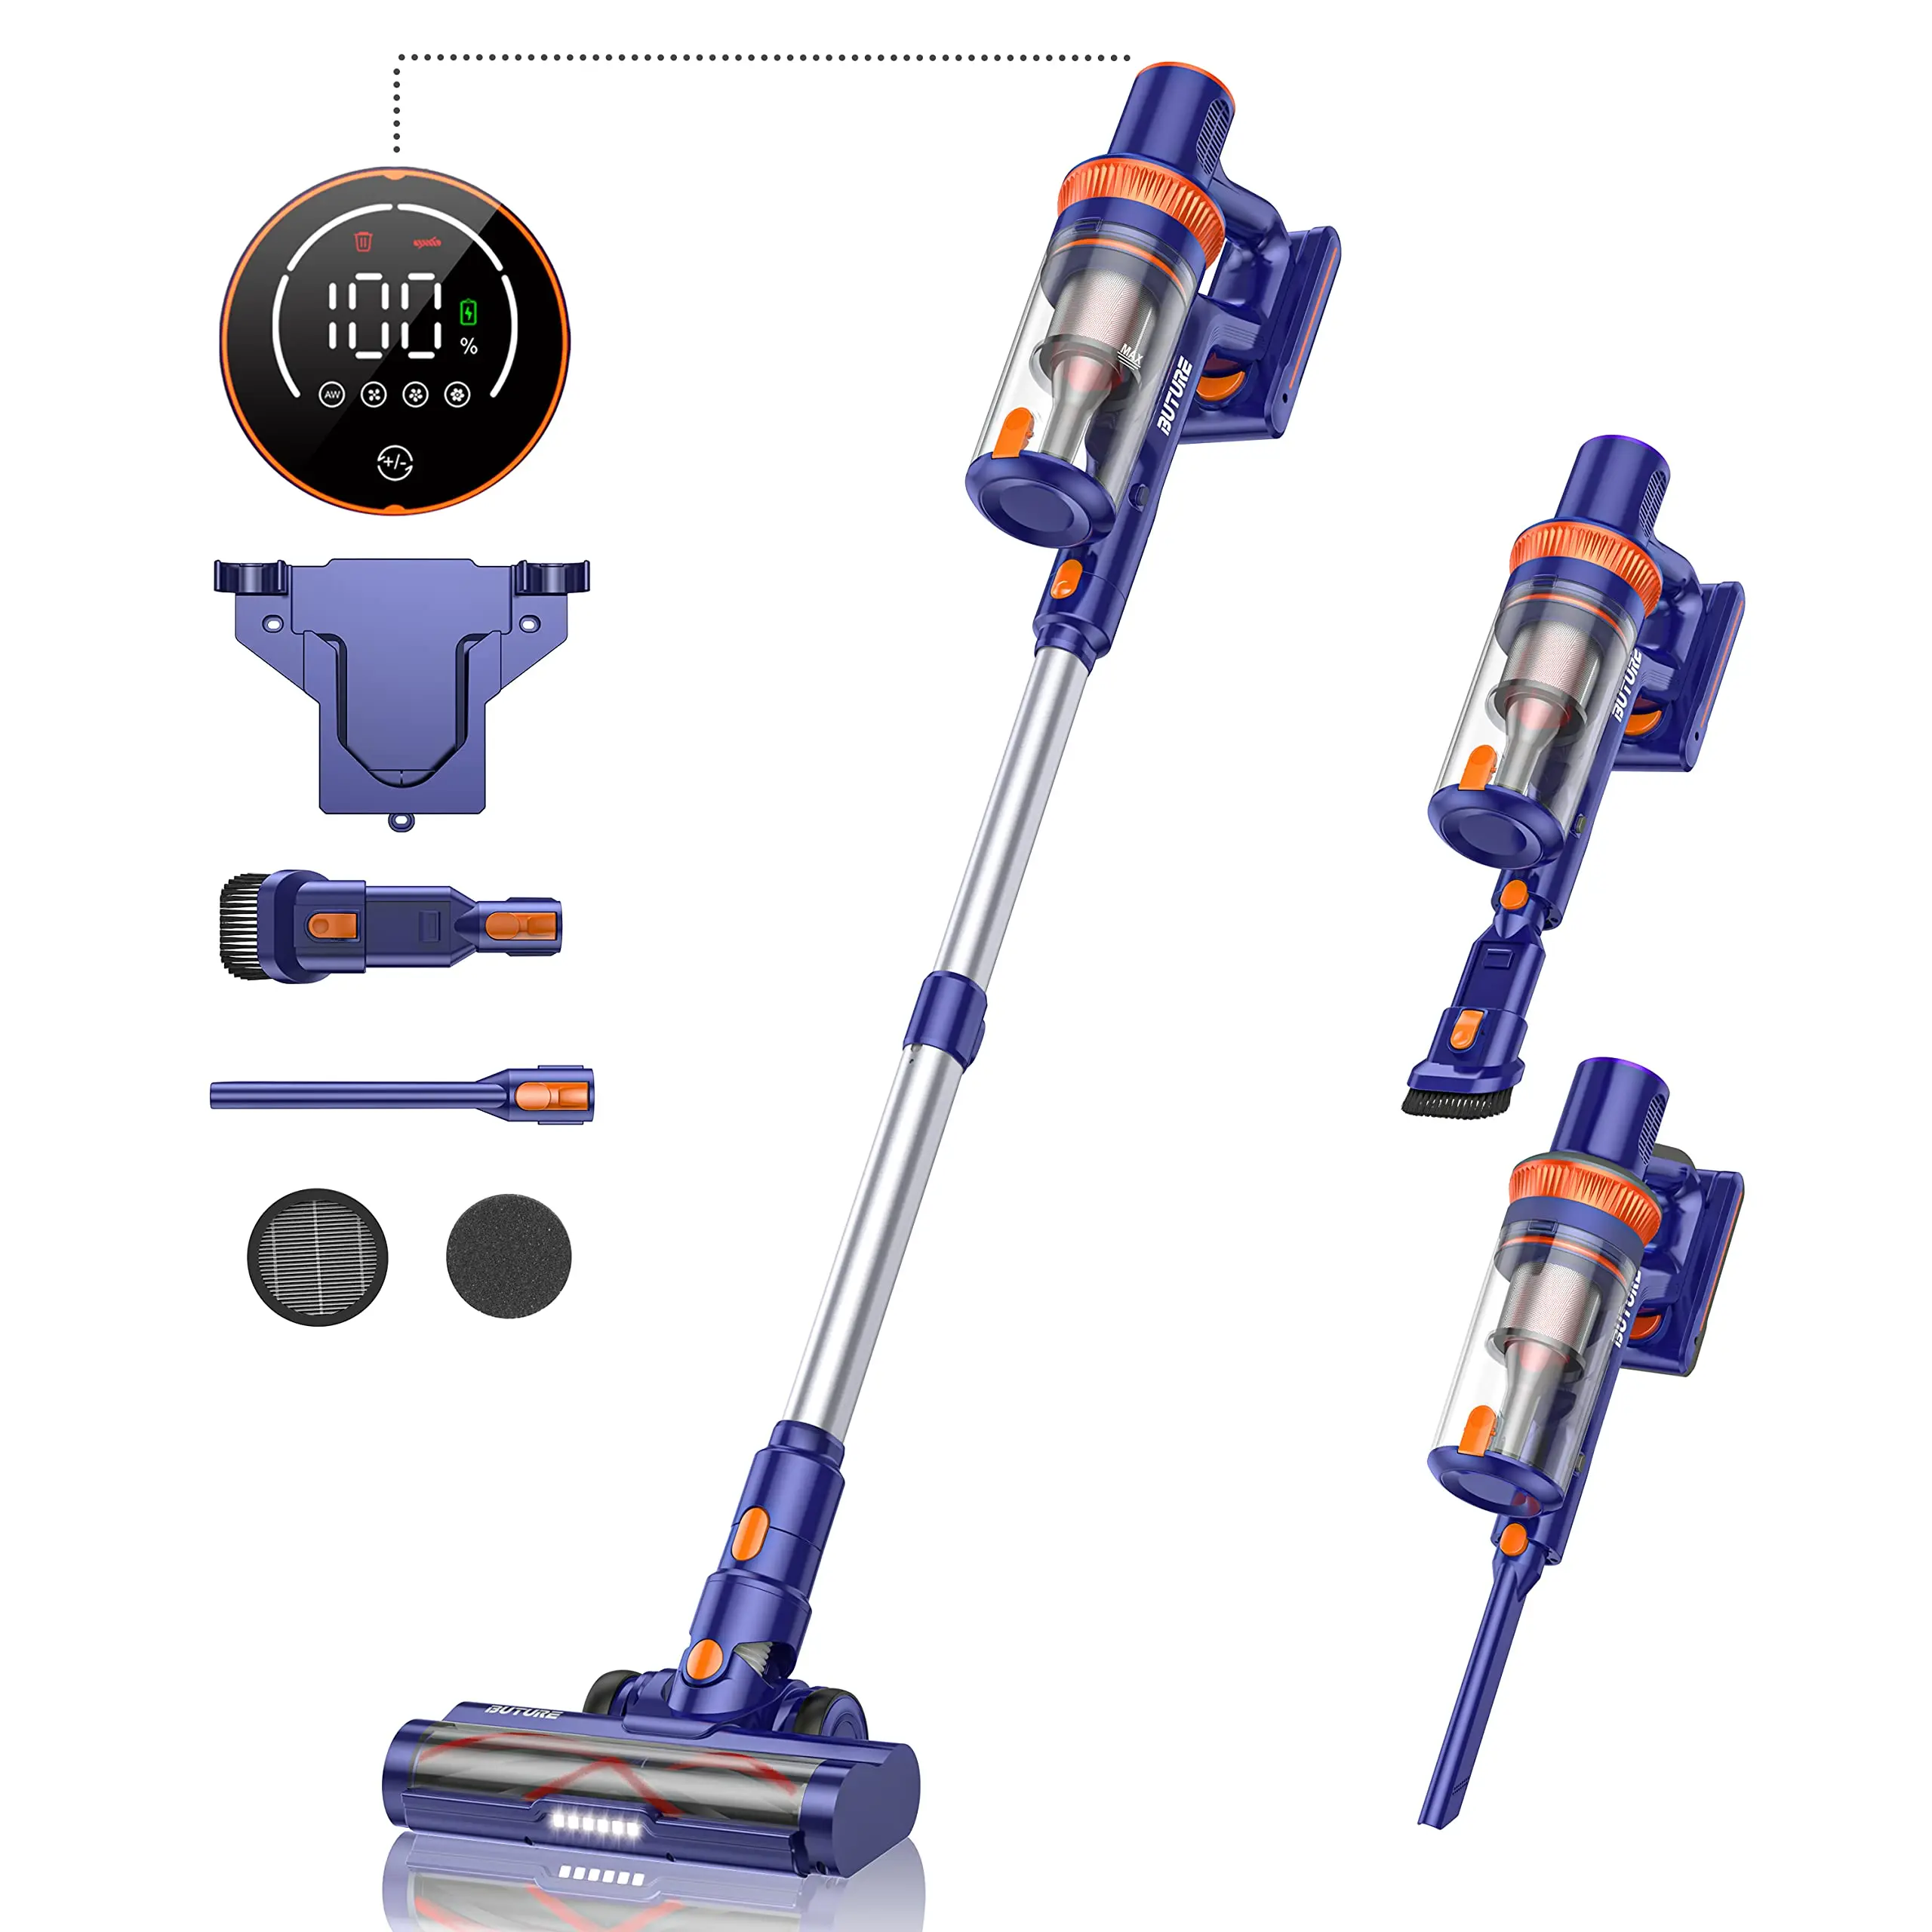 BUTURE 400W 33Kpa Suction Power Handheld Cordless Wireless Vacuum Cleaner  for Home Appliance 1.2L Dust Cup Removable Battery